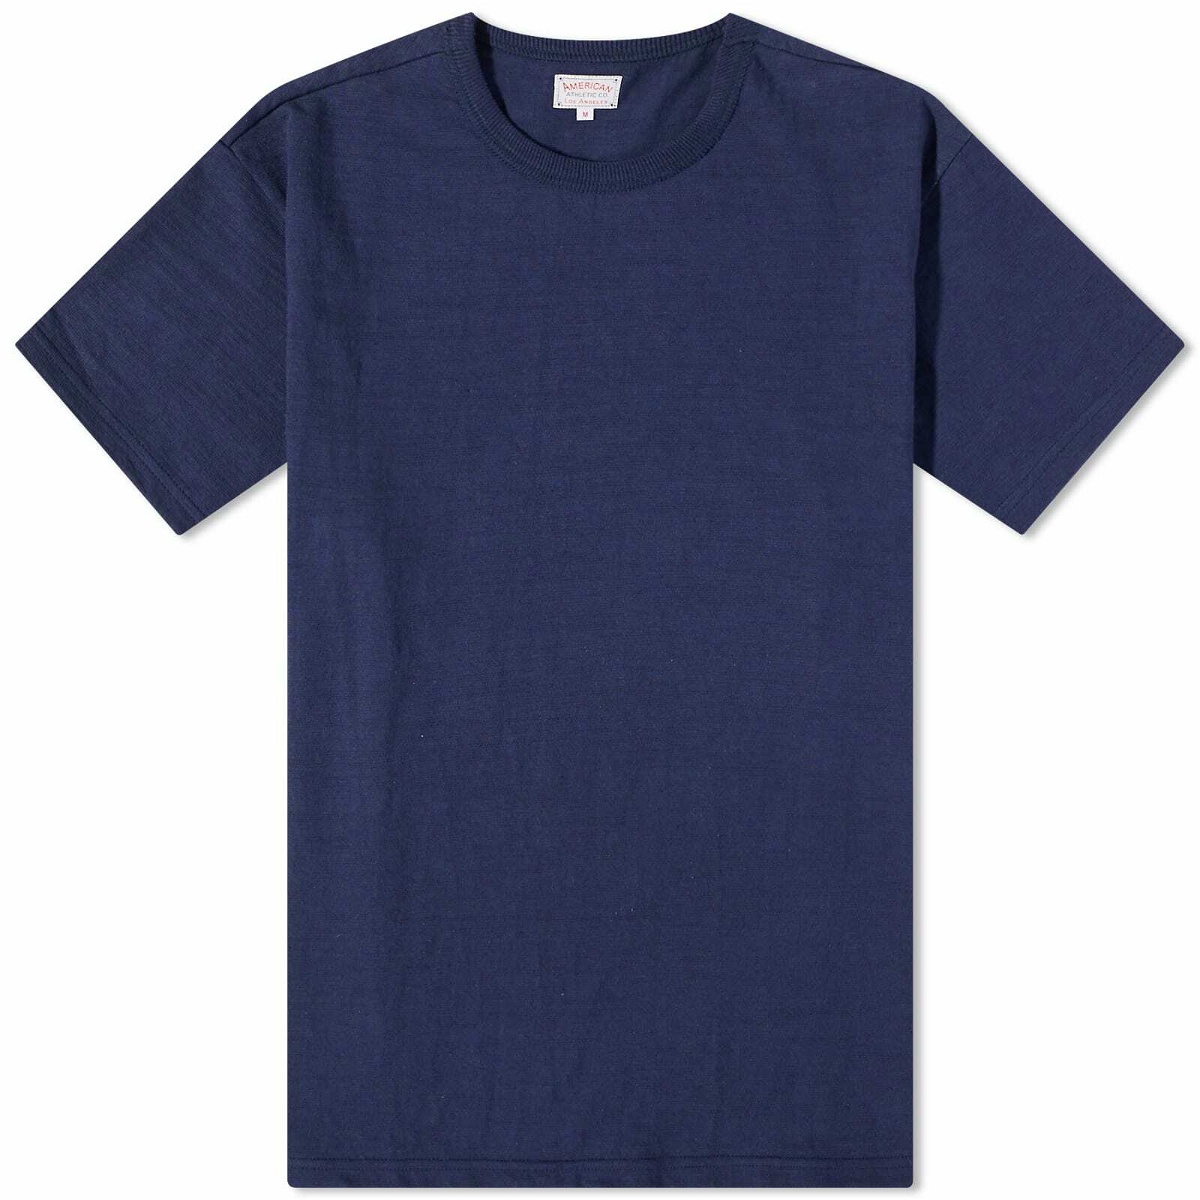 Photo: The Real McCoy's Men's The Real McCoys Loopwheel Athletic T-Shirt in Navy